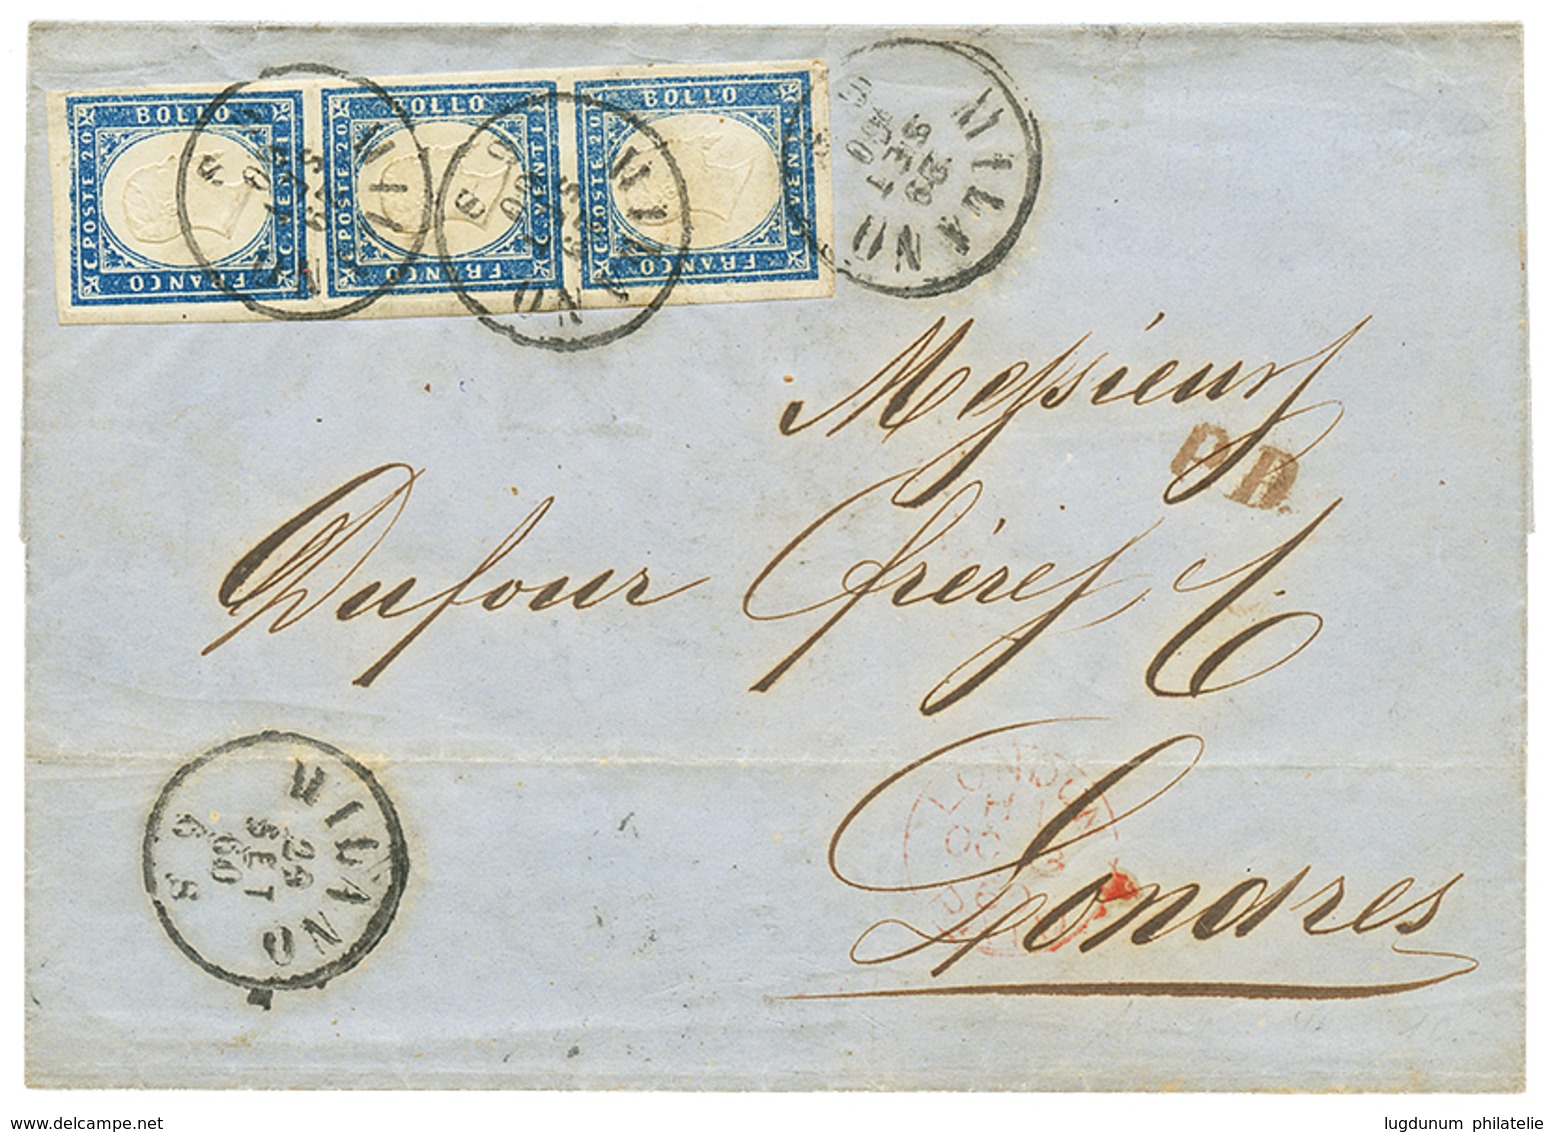 1174 SARDINIA : 1860 20c Strip Of 3 With Large Margins Canc. MILANO On Cover To ENGLAND. Superb. - Non Classés